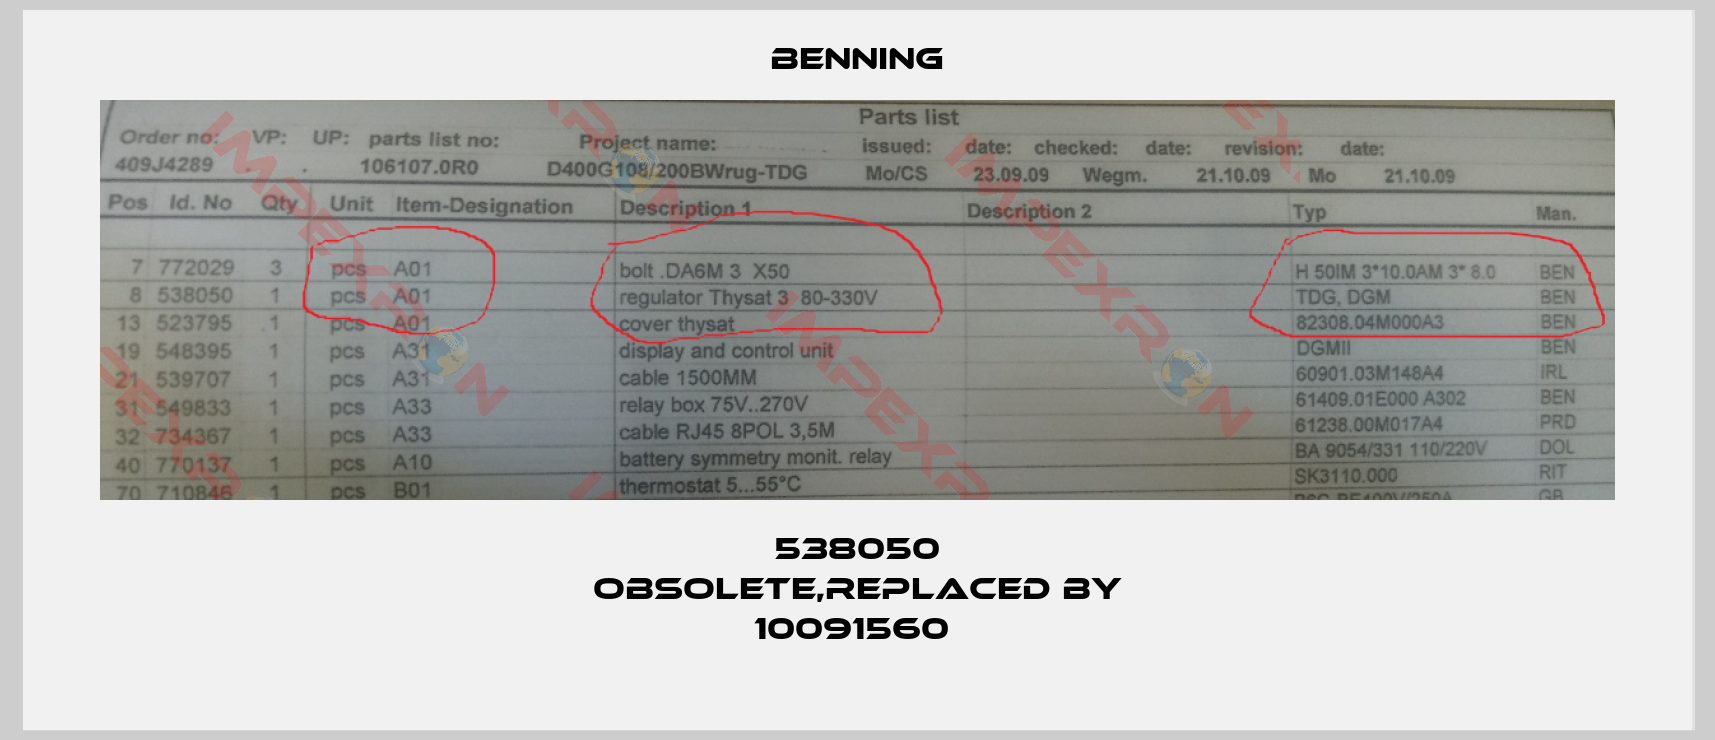 Benning-538050 obsolete,replaced by 10091560 